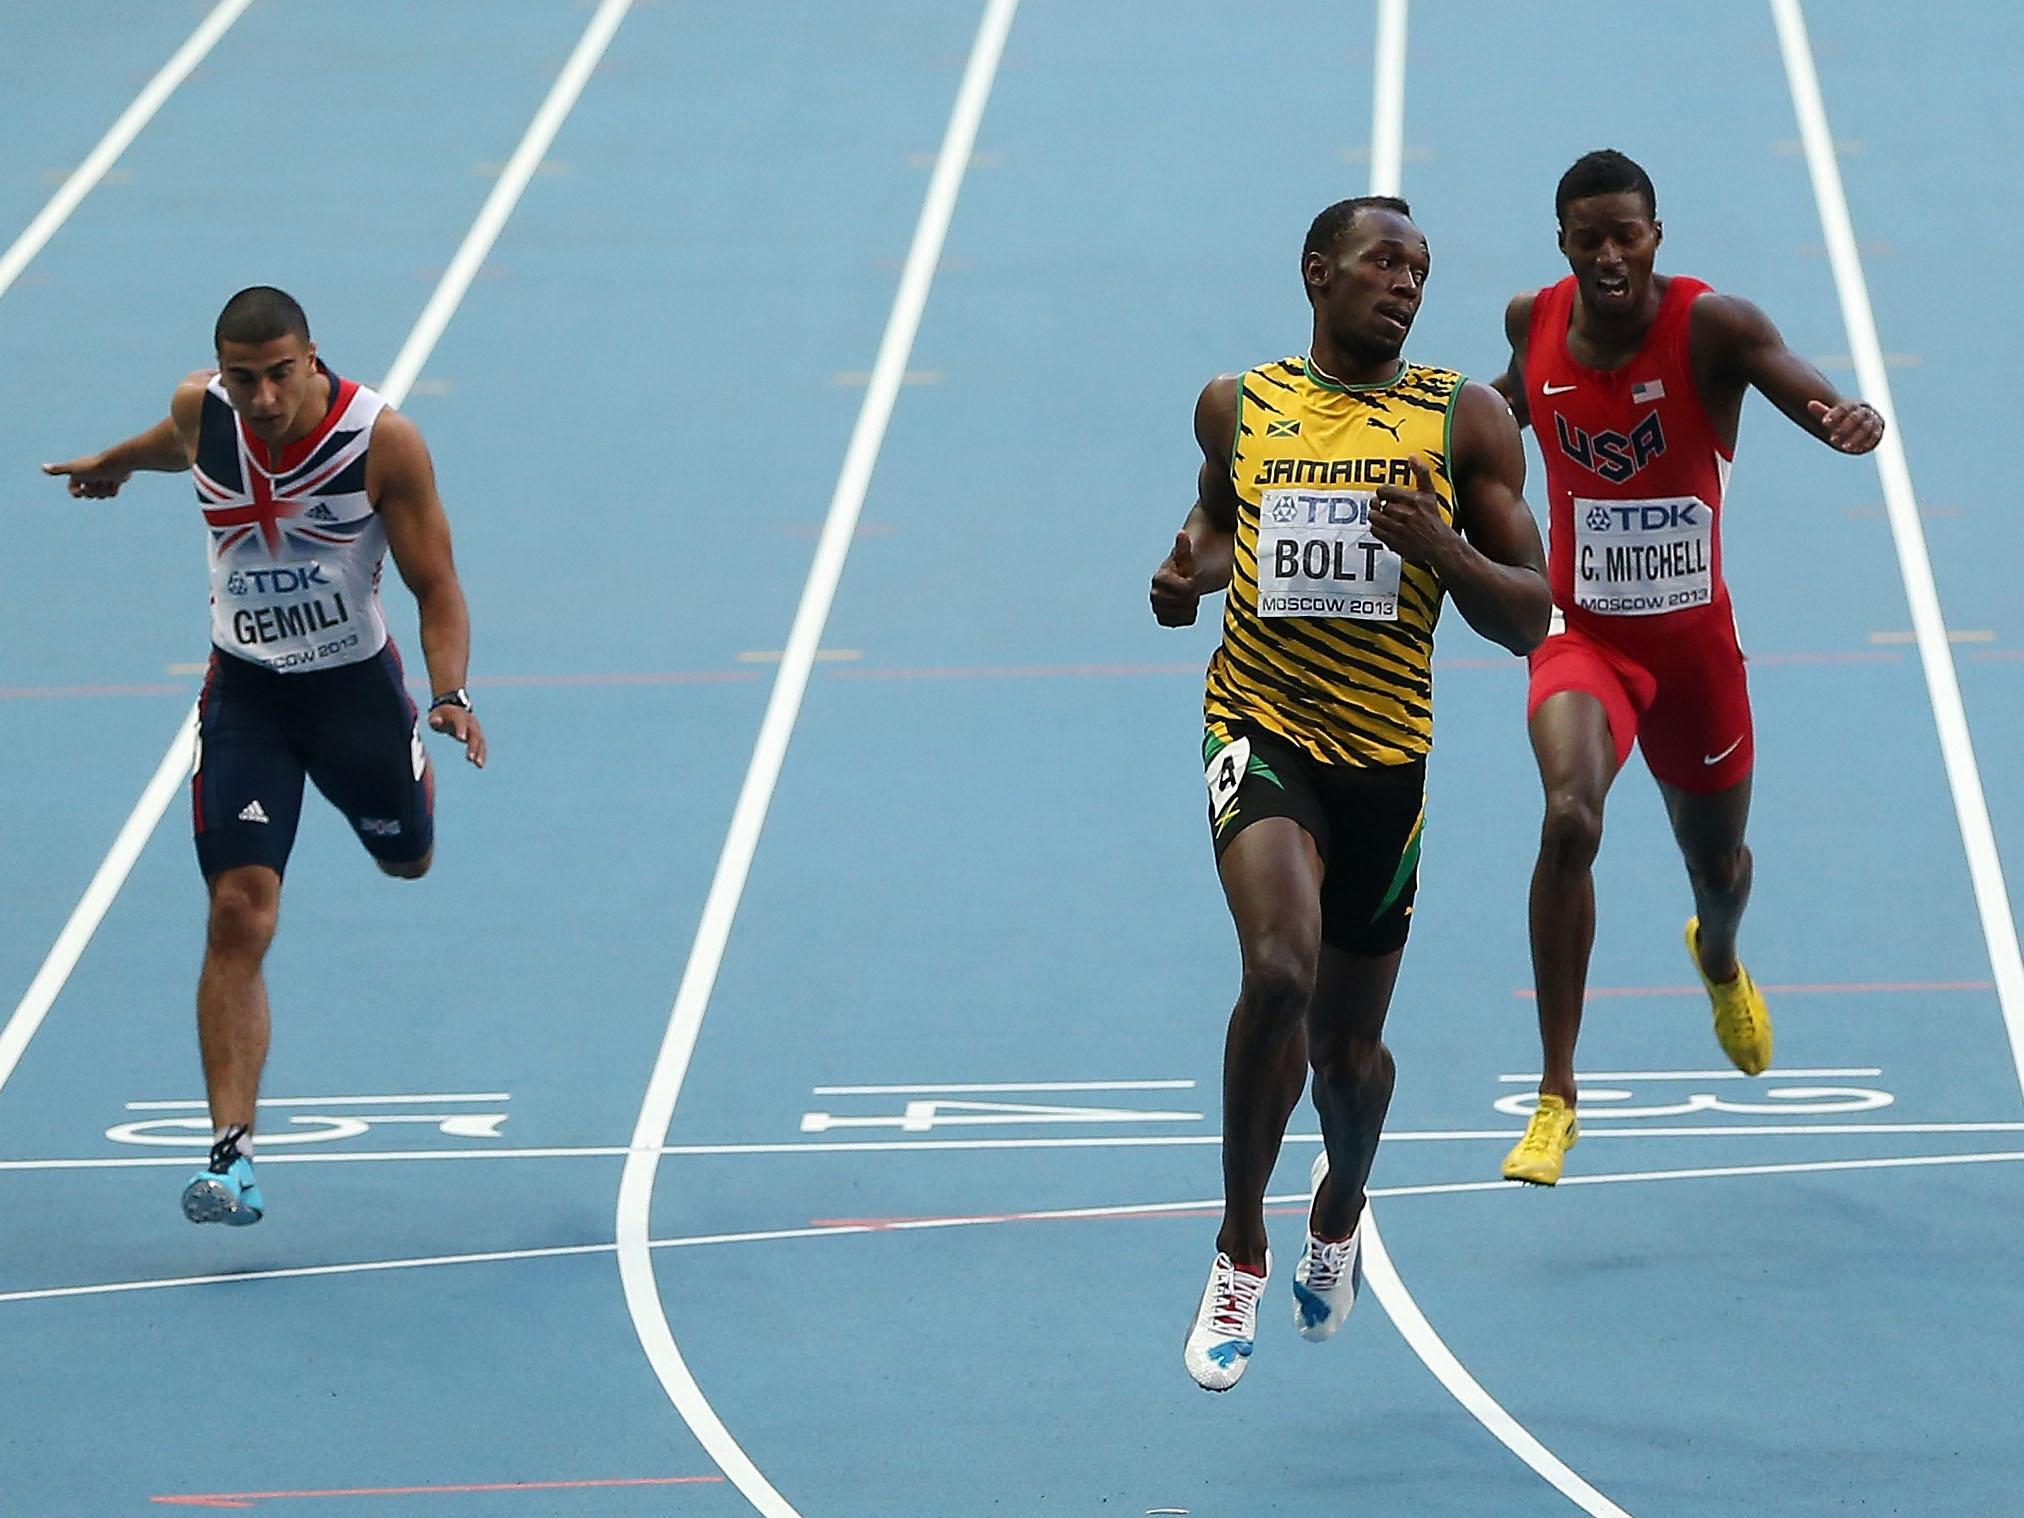 Usain Bolt's era of dominance is over, and Adam Gemili believes the 100m is wide open in Doha